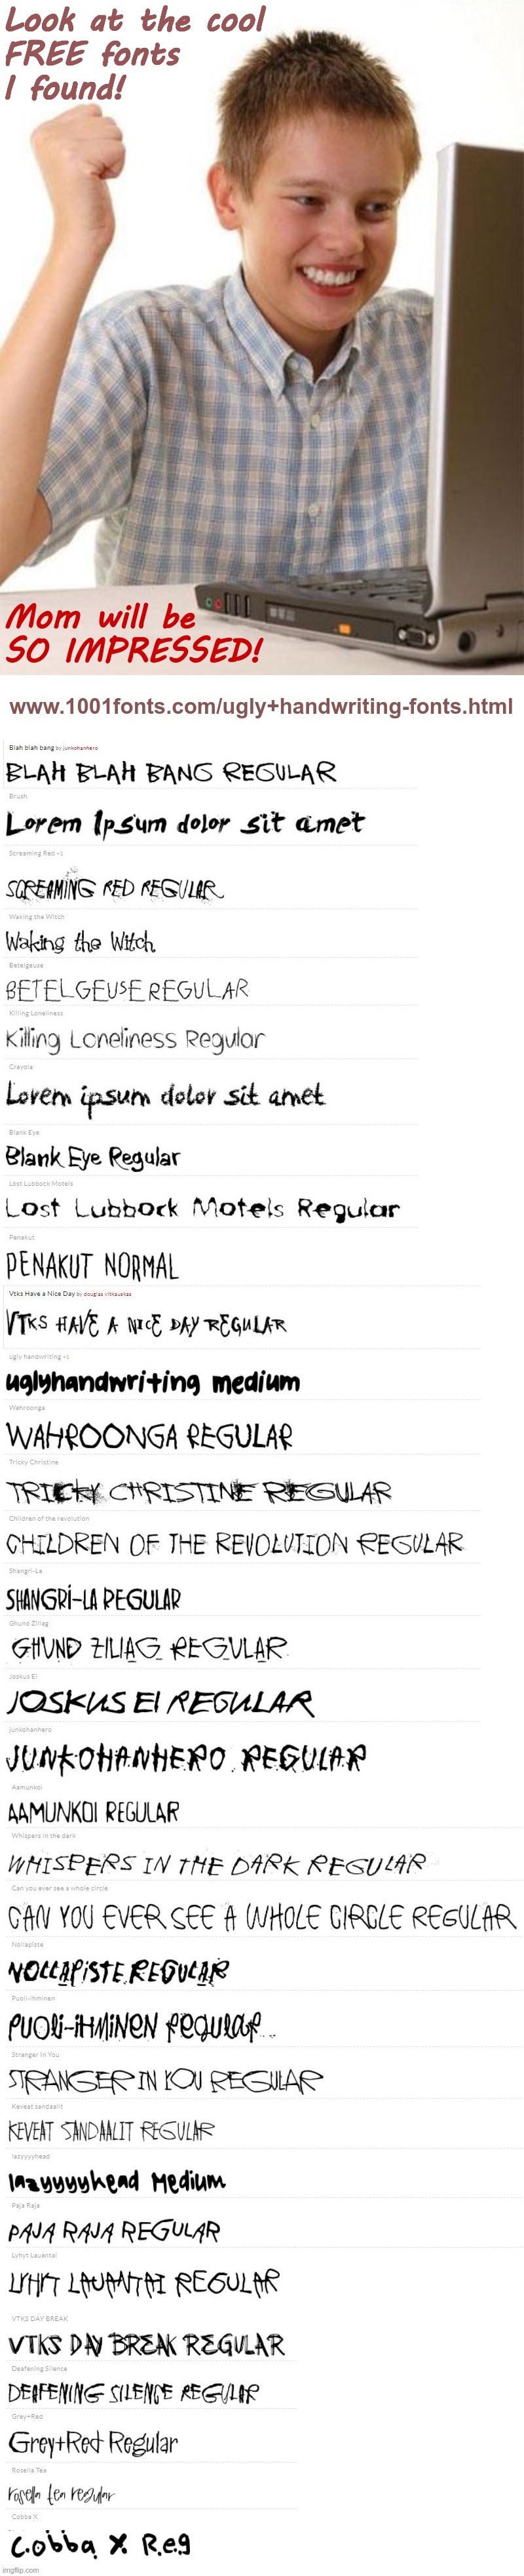 IF YOU NEED A CREEPY FONT FOR A MEME ... (See Comments) | Look at the cool FREE fonts I found! Mom will be SO IMPRESSED! www.1001fonts.com/ugly+handwriting-fonts.html | image tagged in first day on the internet kid,ugly creepy handwriting fonts dark humor,fonts,creepy,new template,rick75230 | made w/ Imgflip meme maker